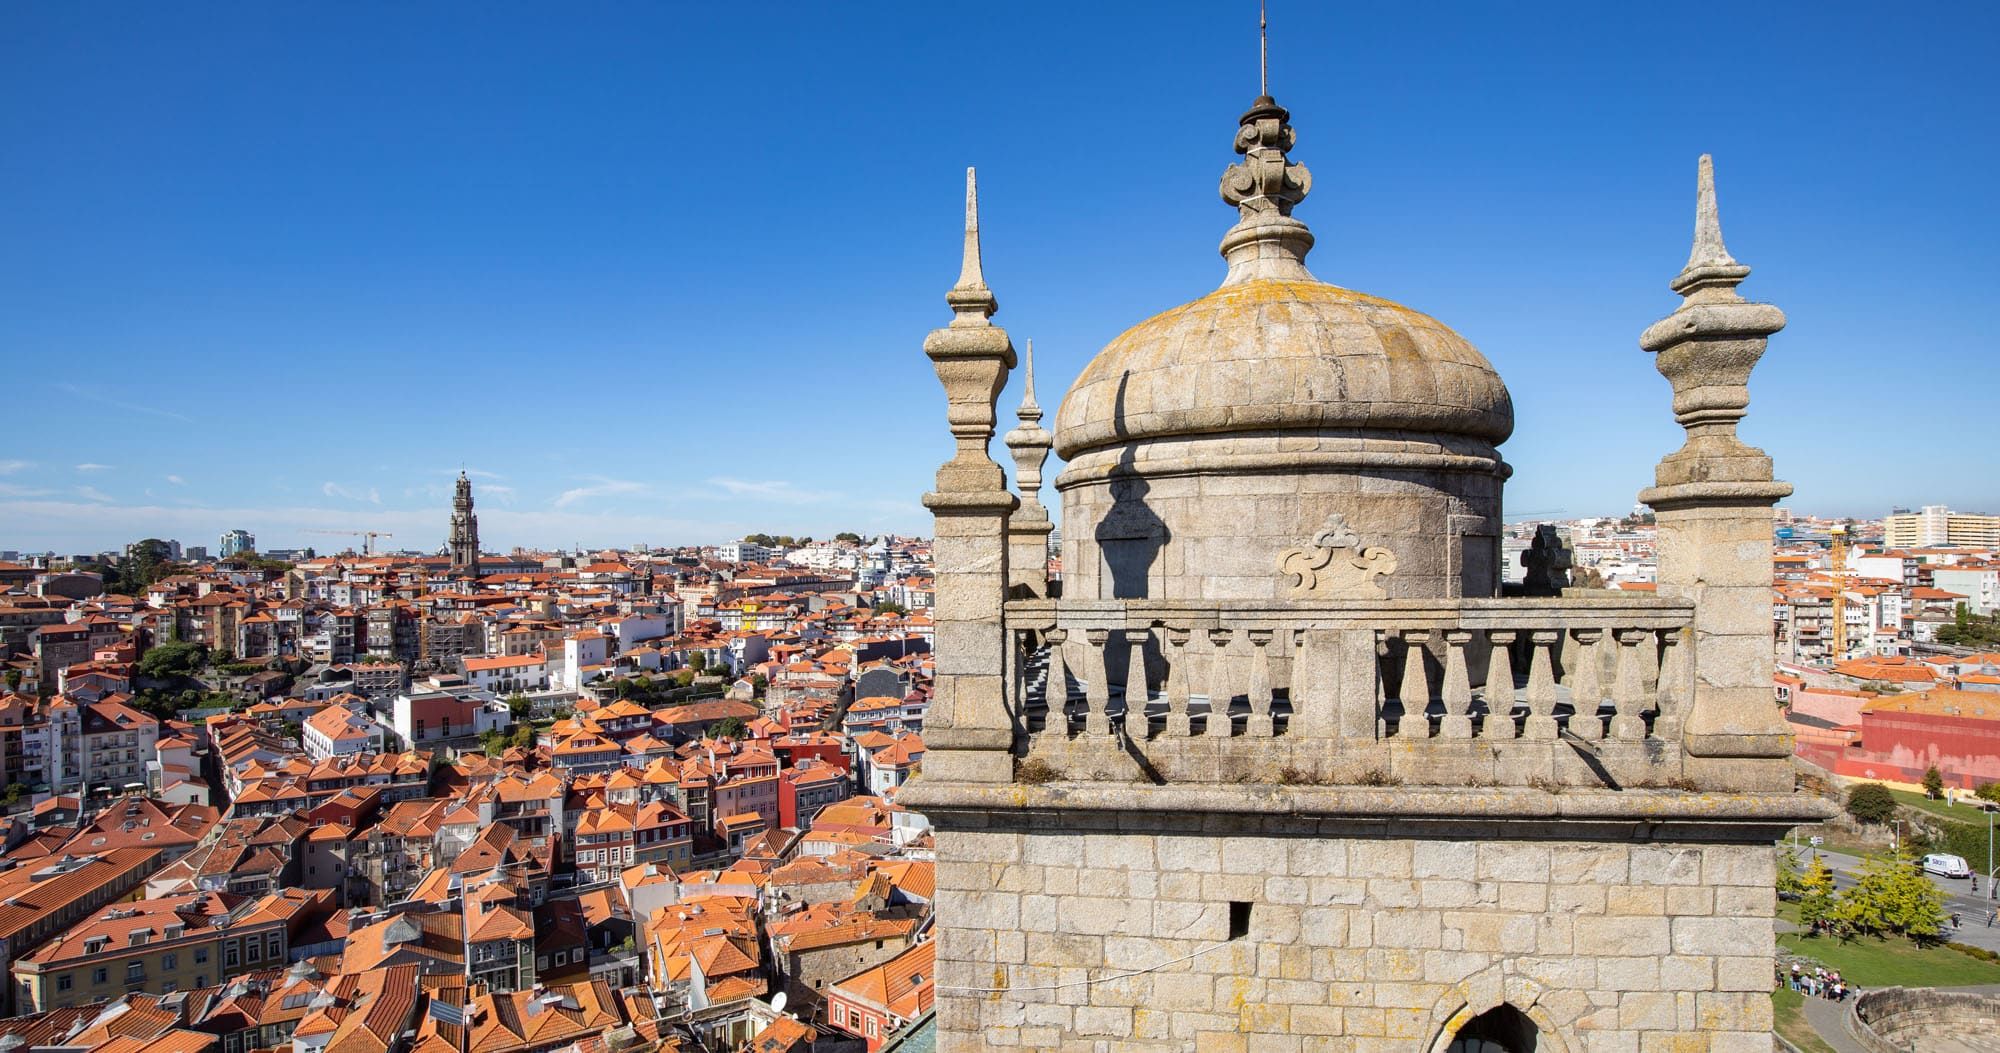 Featured image for “One Day in Porto: Best of Porto in 24 Hours”